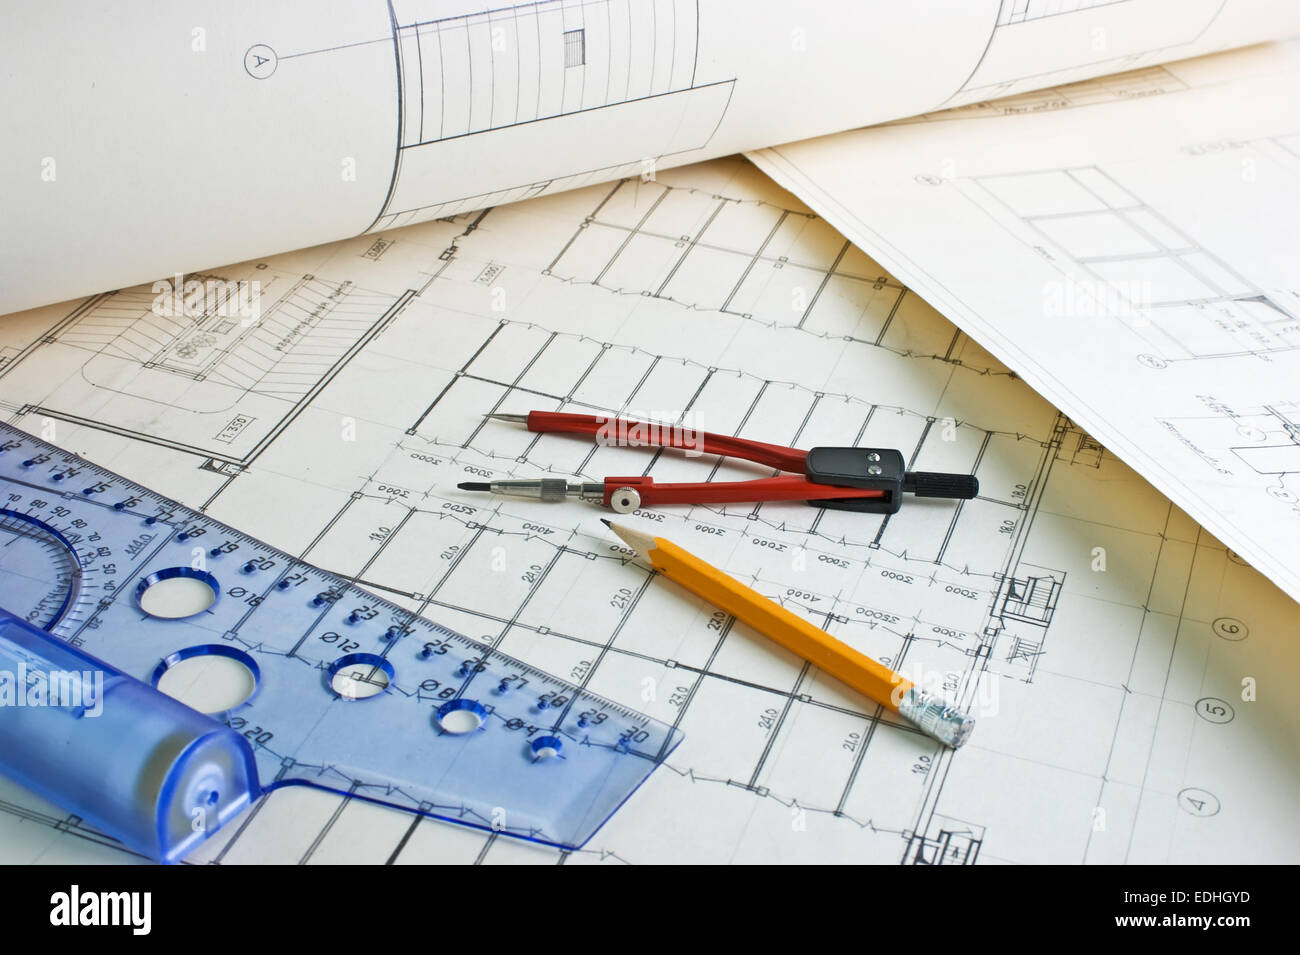 Old architectural drawing with a ruler and compass Stock Photo - Alamy